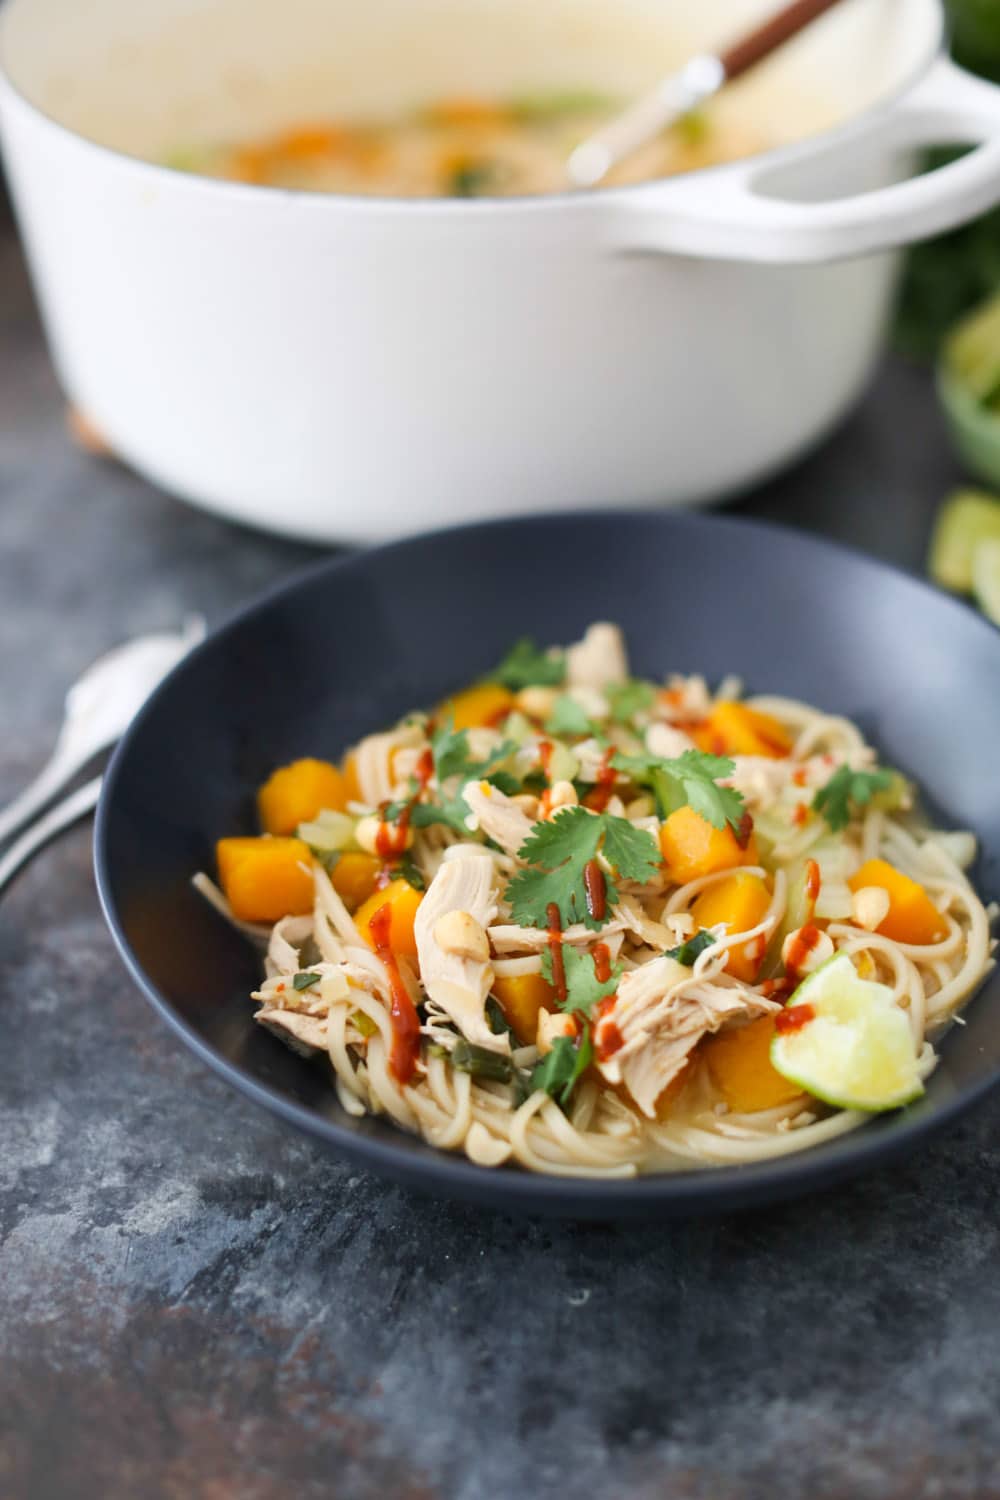 One-Pot Asian Noodles with Chicken, Butternut Squash and Baby Bok Choy